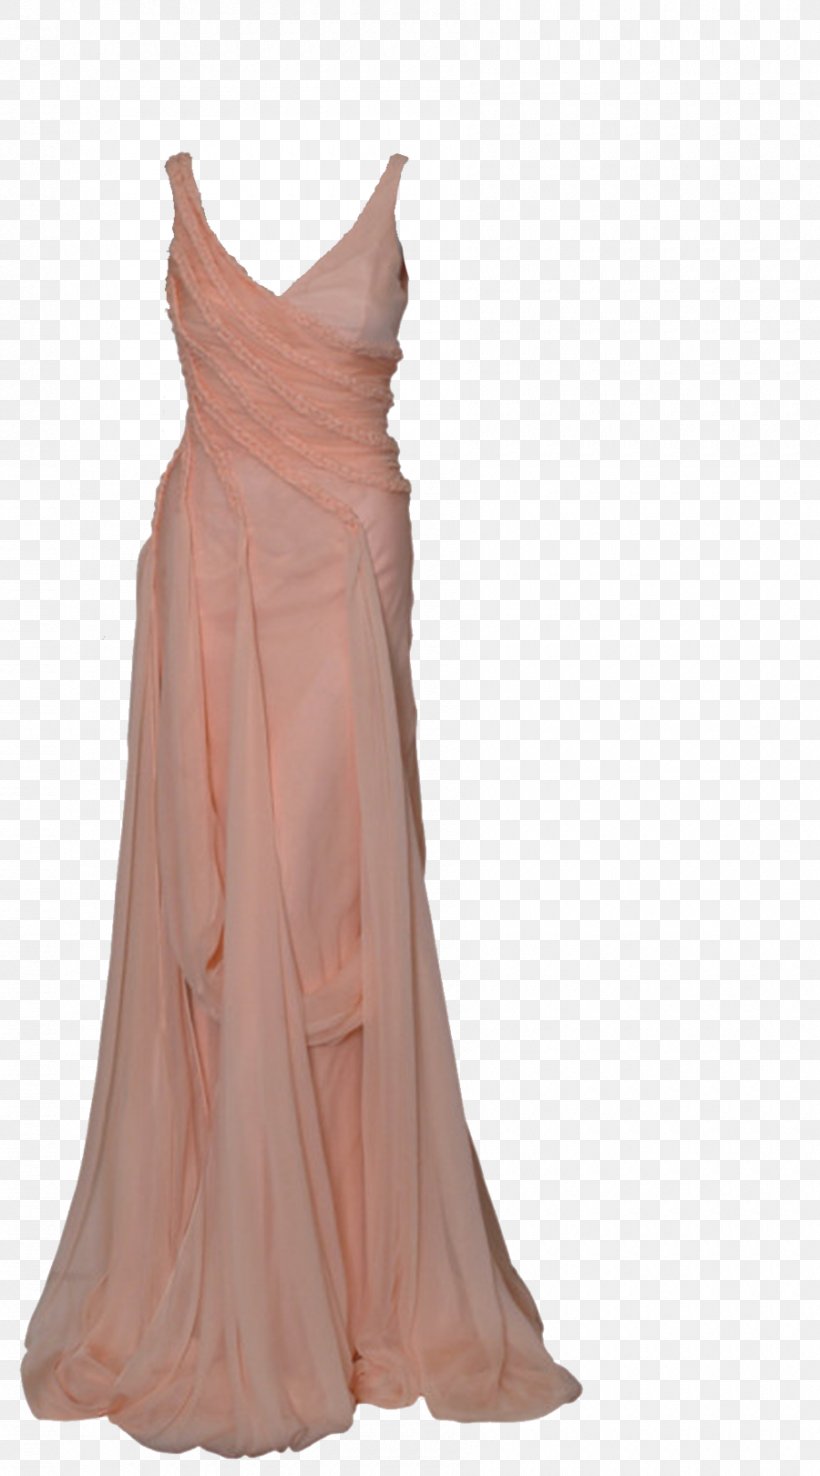 Cocktail Dress Ball Gown Clothing, PNG, 900x1620px, Dress, Ball Gown, Bridal Party Dress, Clothing, Cocktail Dress Download Free